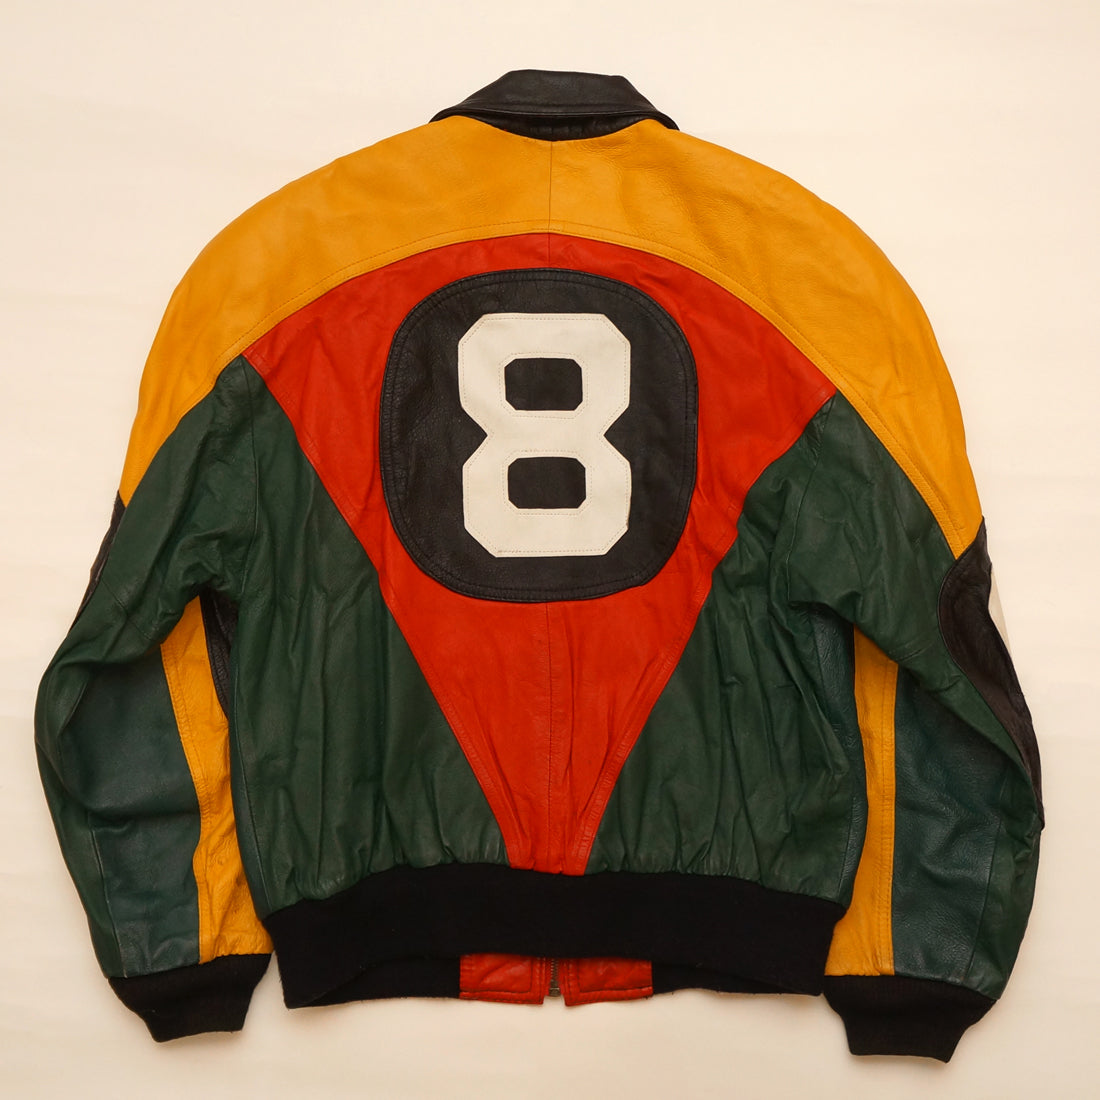 Vintage Yellow, Red and Green Leather "8 Ball" Jacket By Phase 2